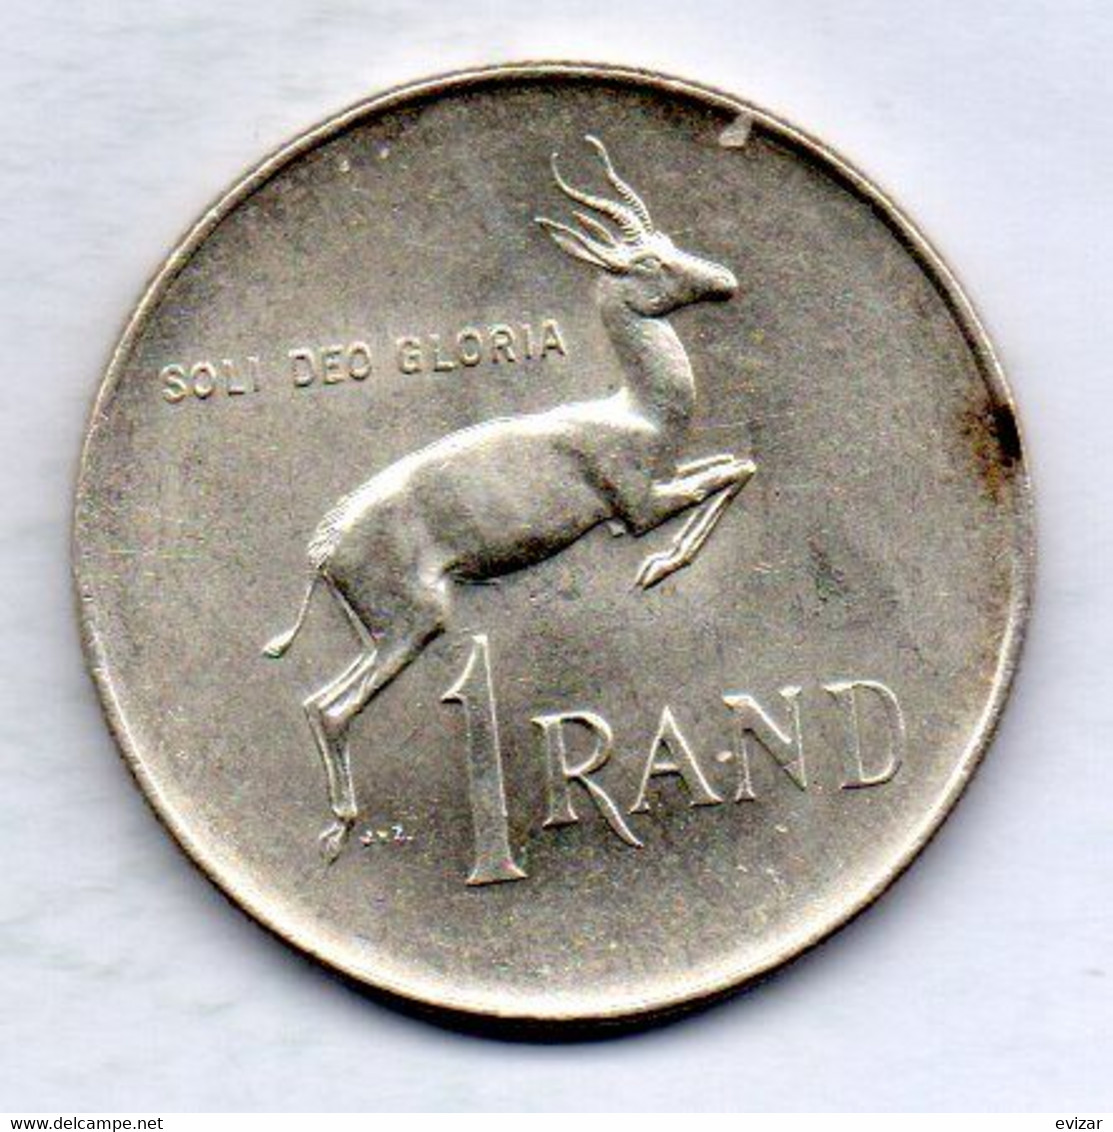 SOUTH AFRICA, 1 Rand (SOUTH), Silver, Year 1966, KM #71.1 - South Africa